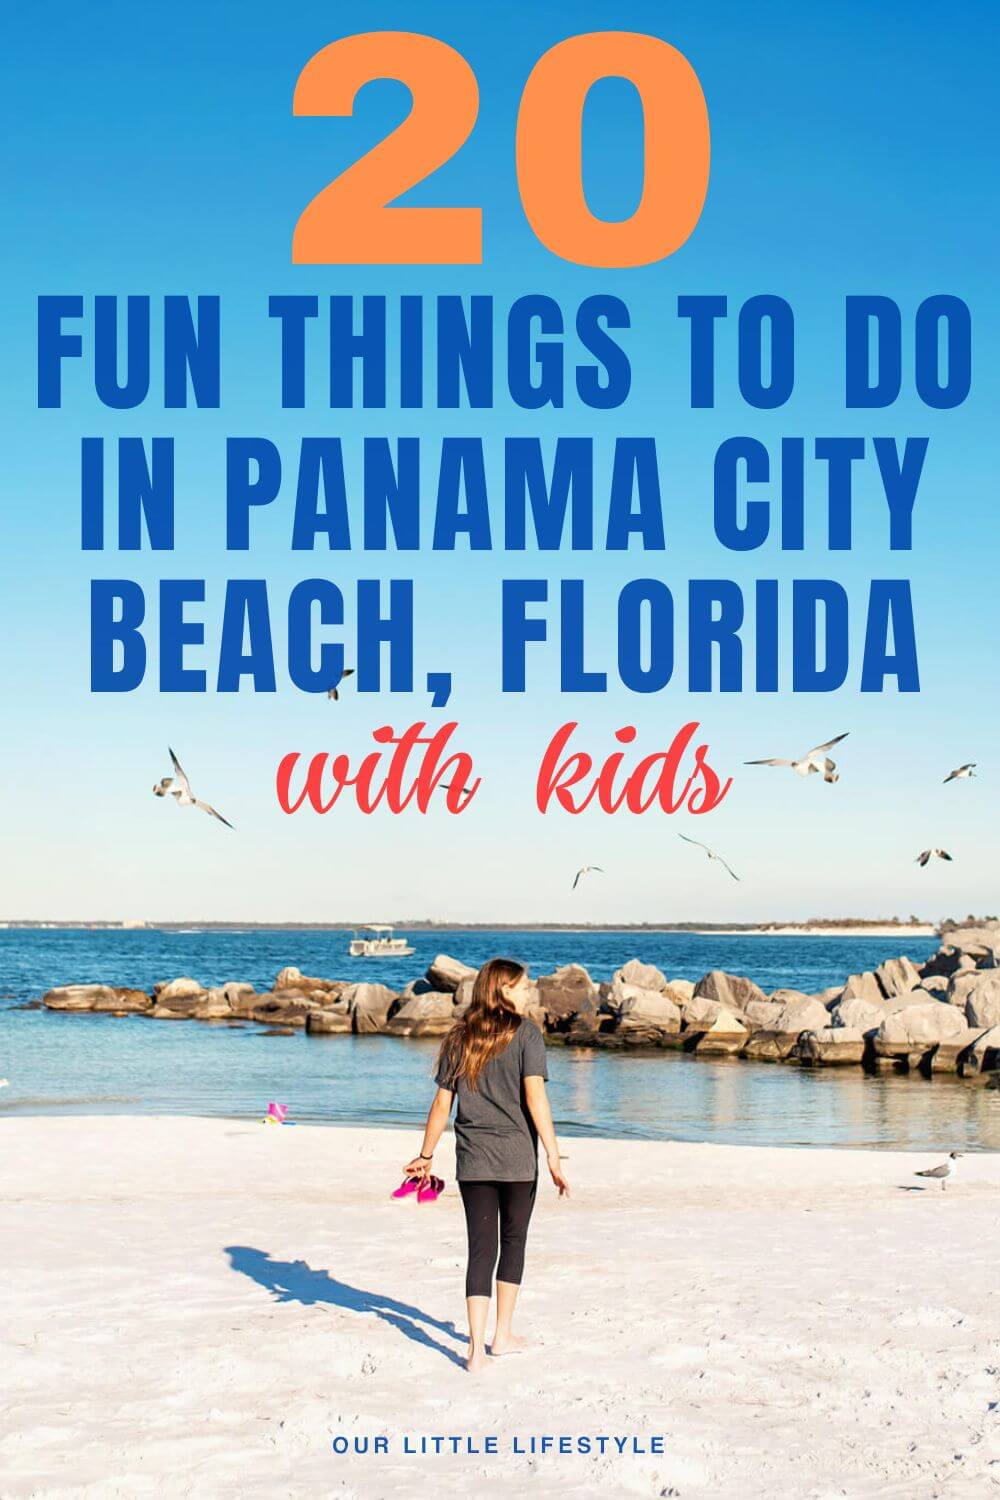 Things To Do IN Panama City Beach with Kids